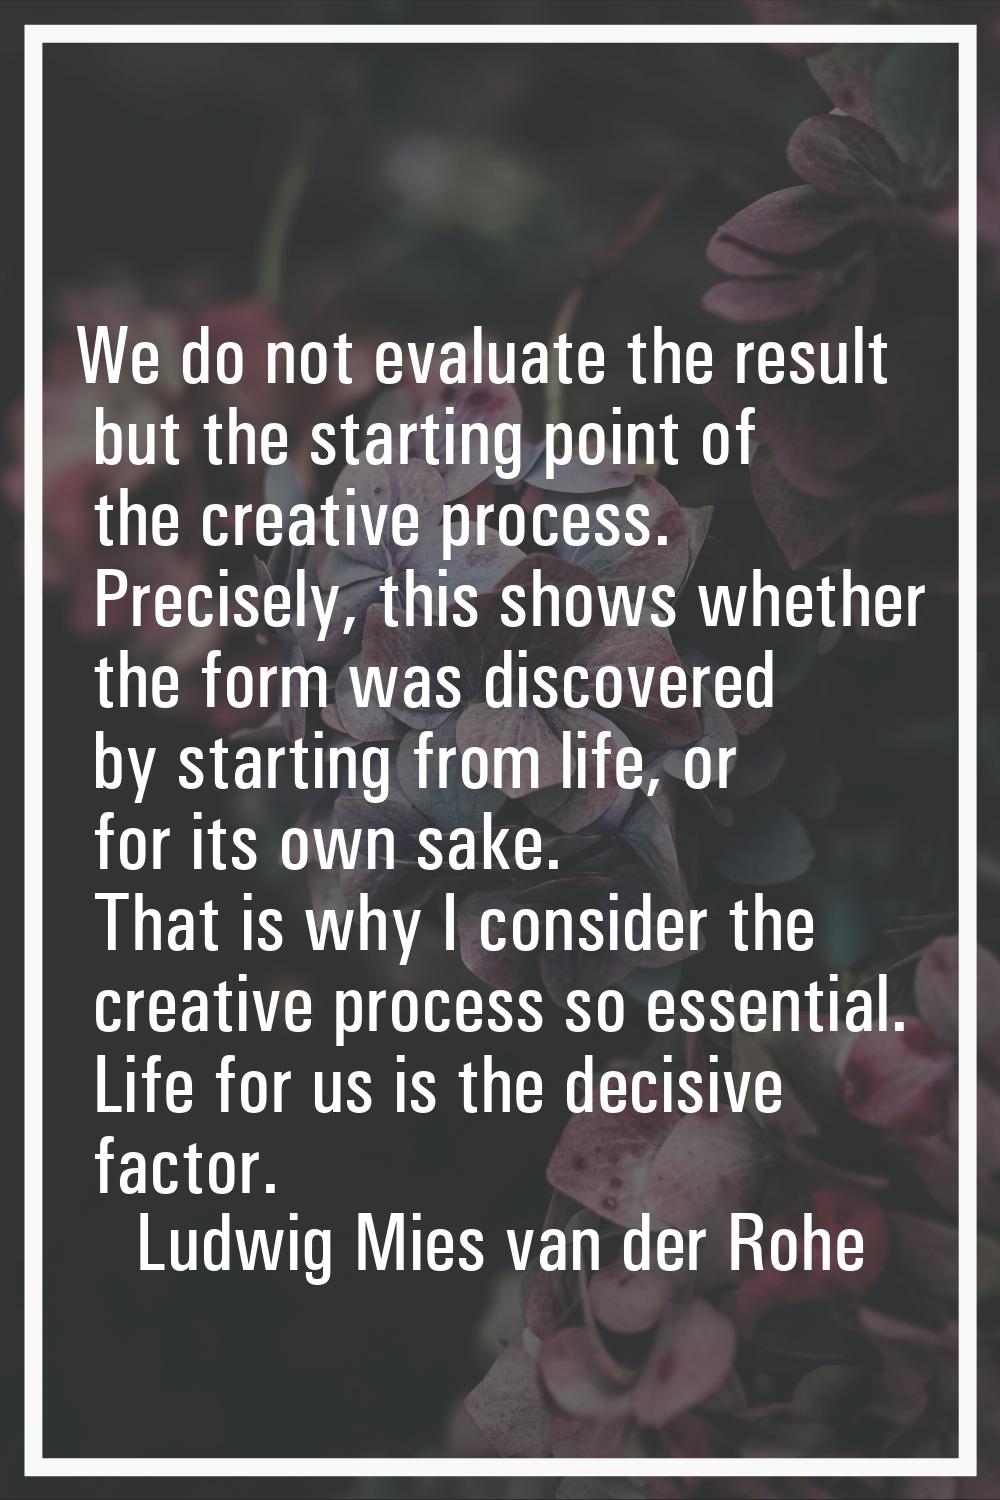 We do not evaluate the result but the starting point of the creative process. Precisely, this shows